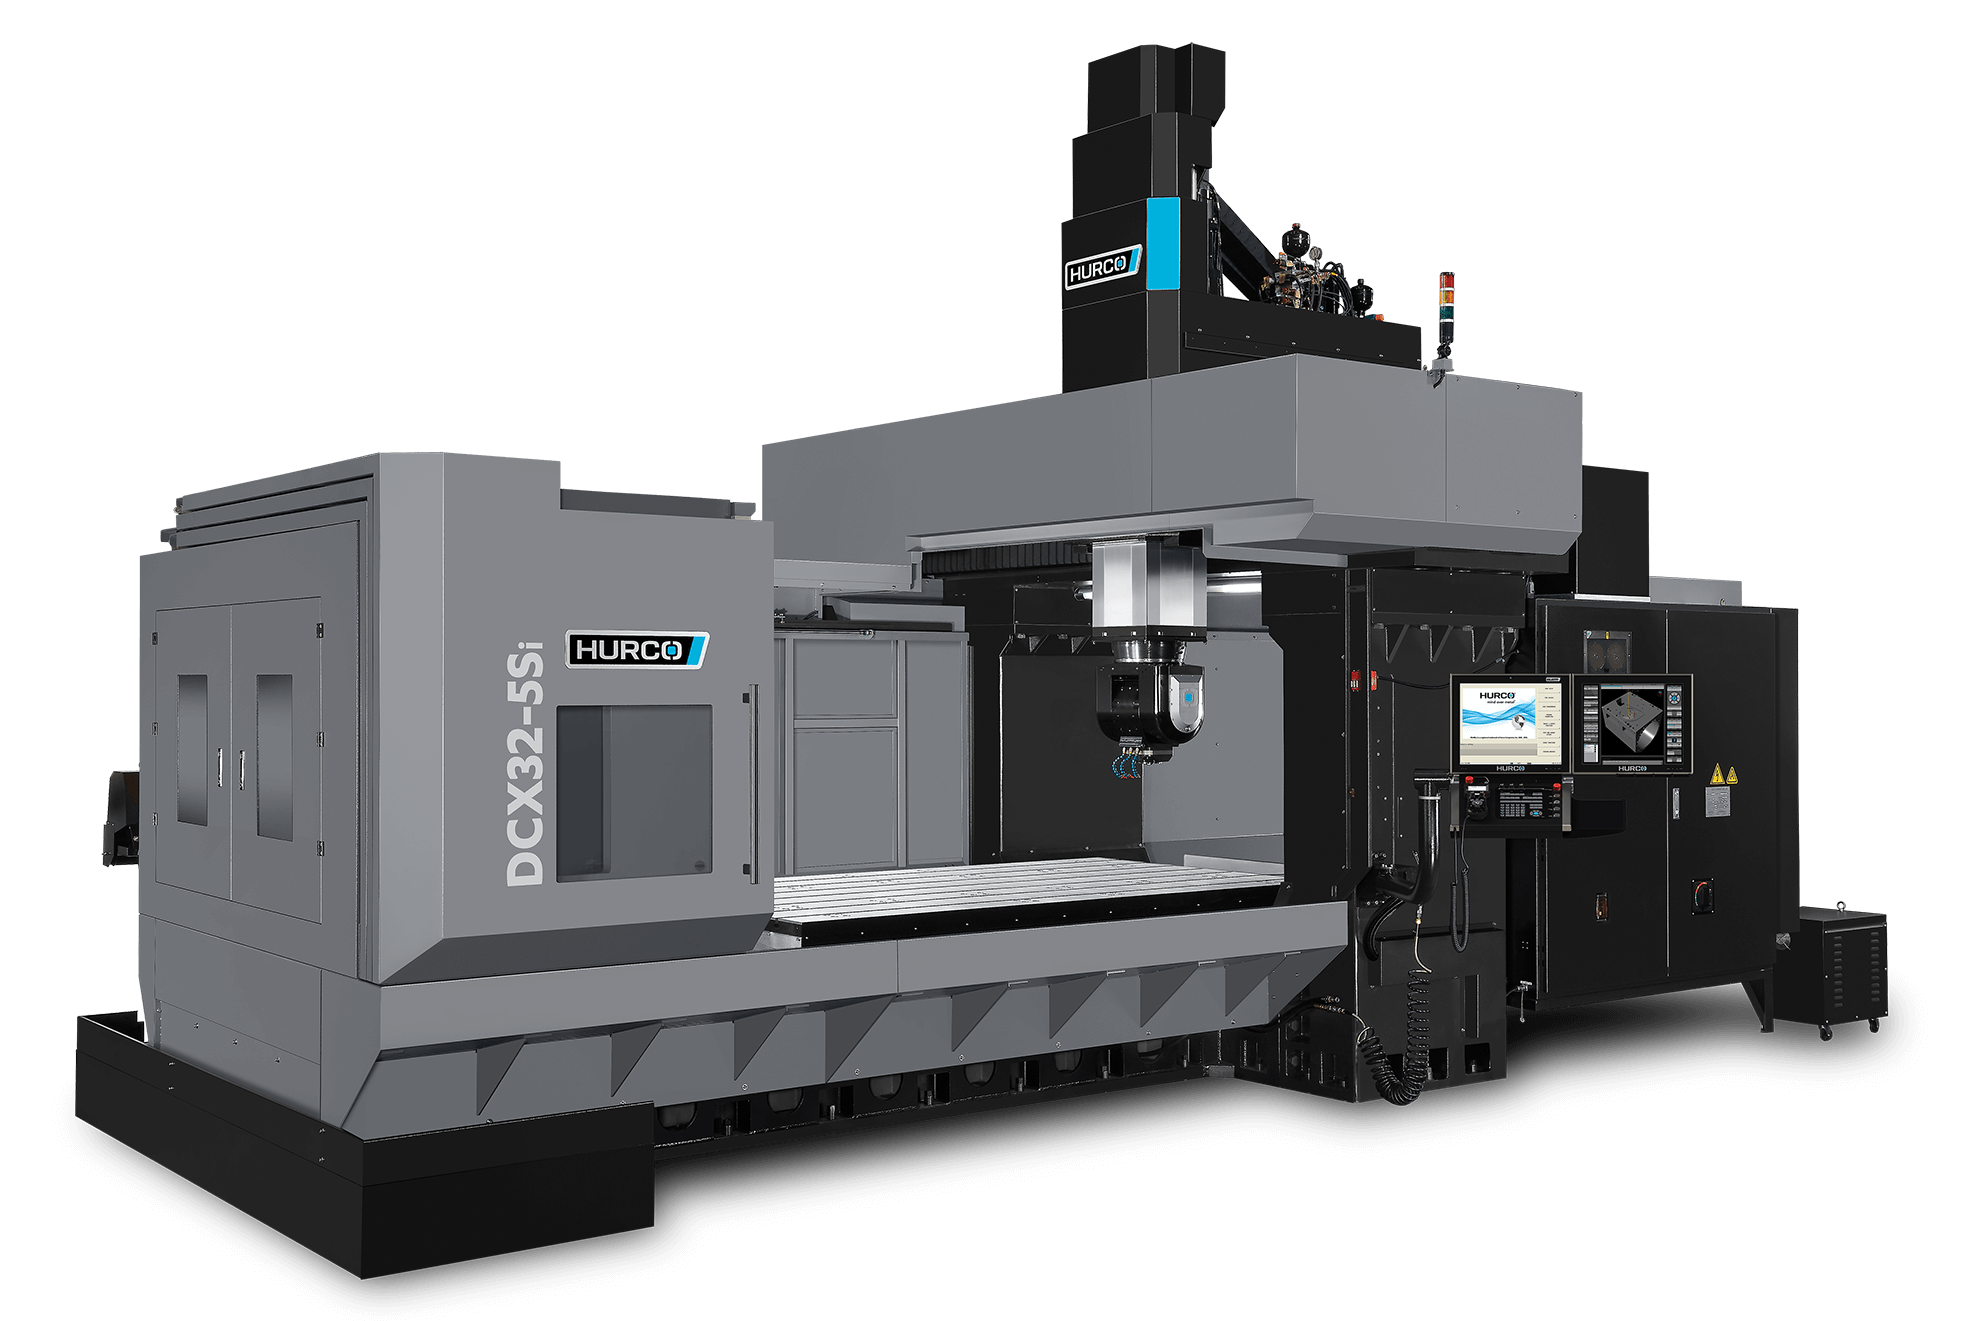 CNC Milling Machines Axis Explained